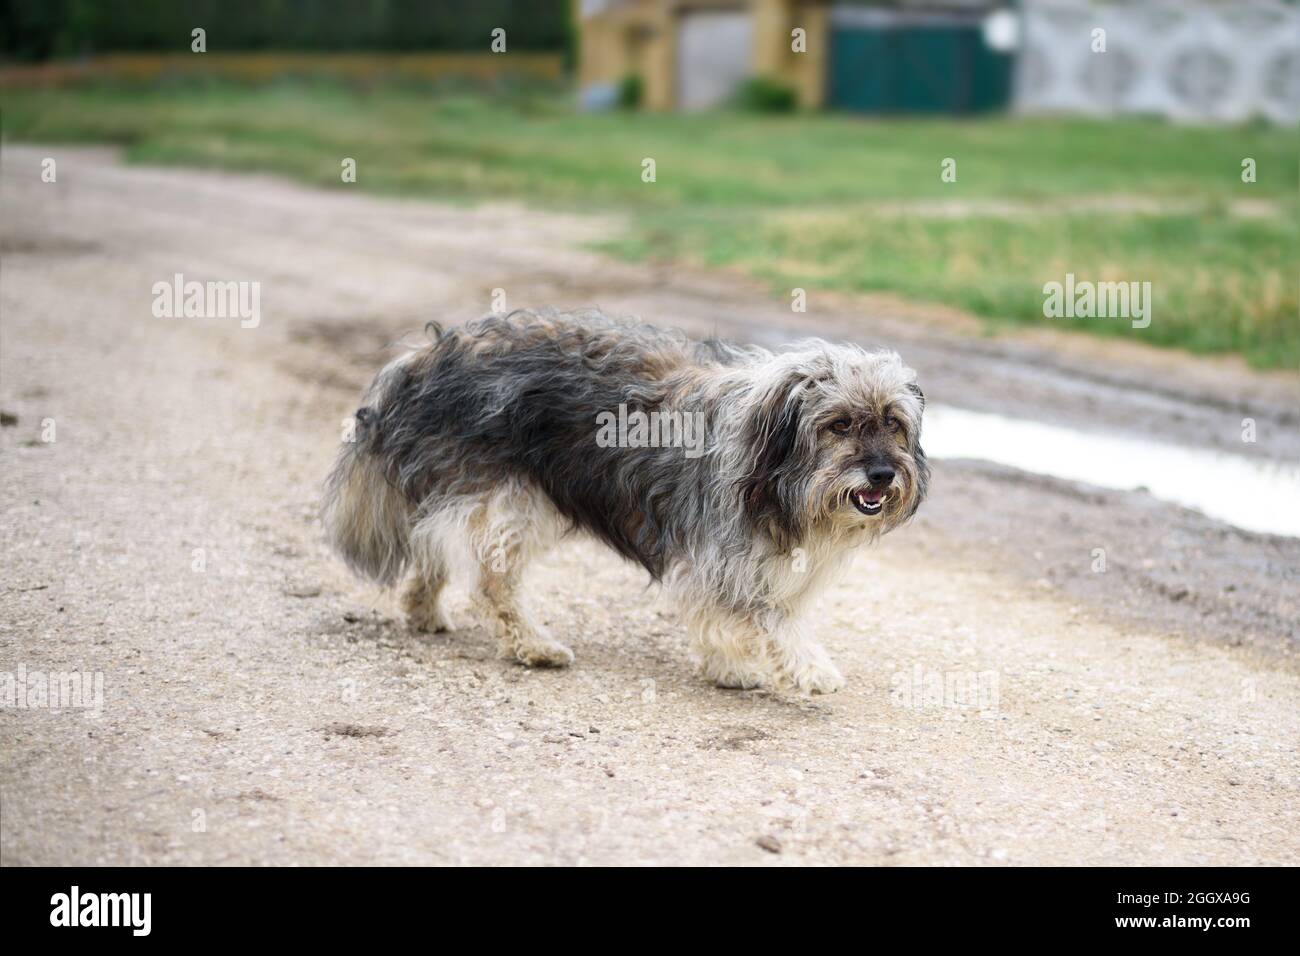 A cute lost dog walking along the countryside road. Homeless. Stock Photo